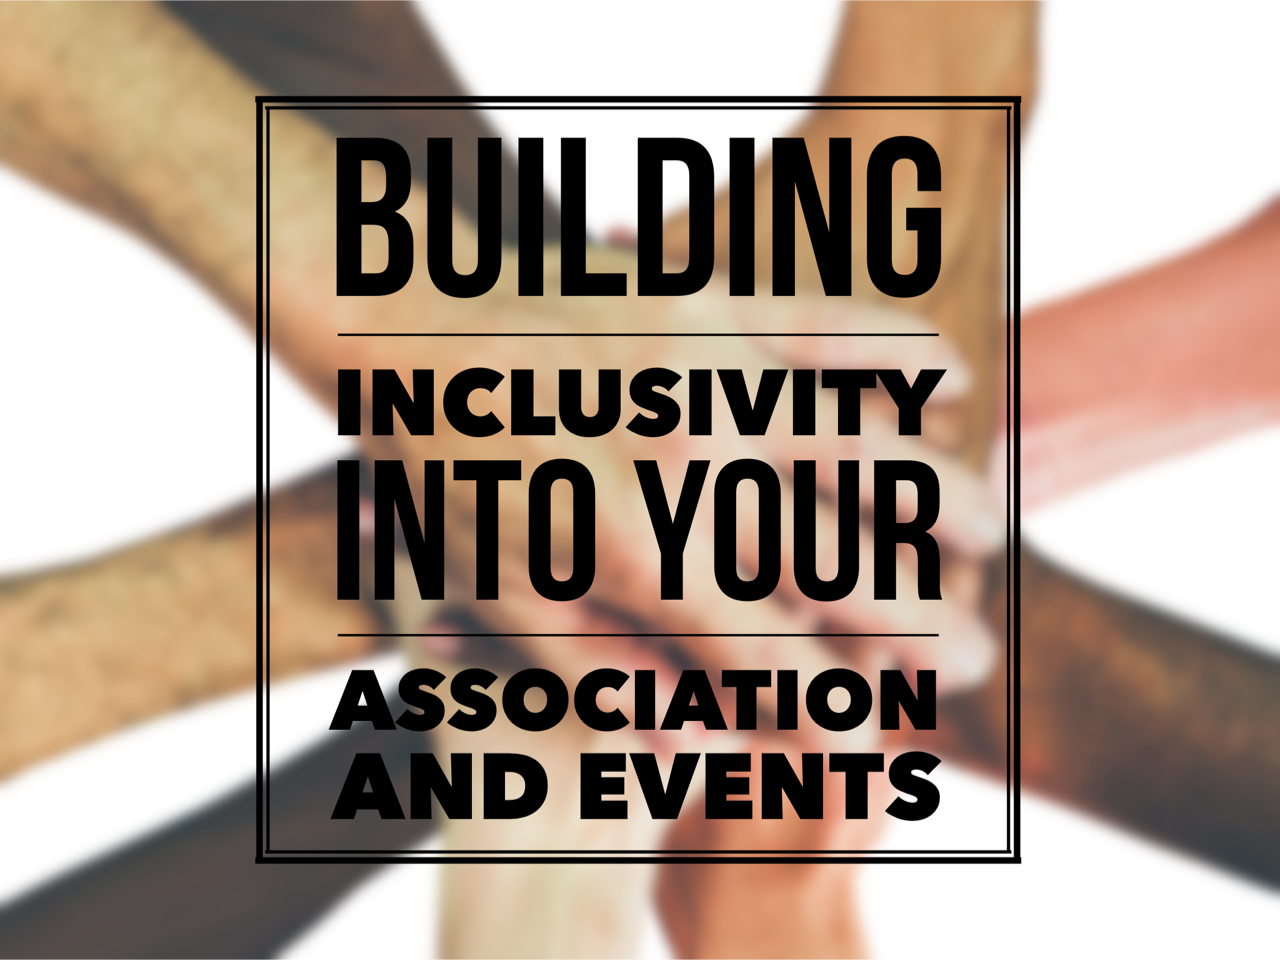 Building Inclusivity into your Association and Events